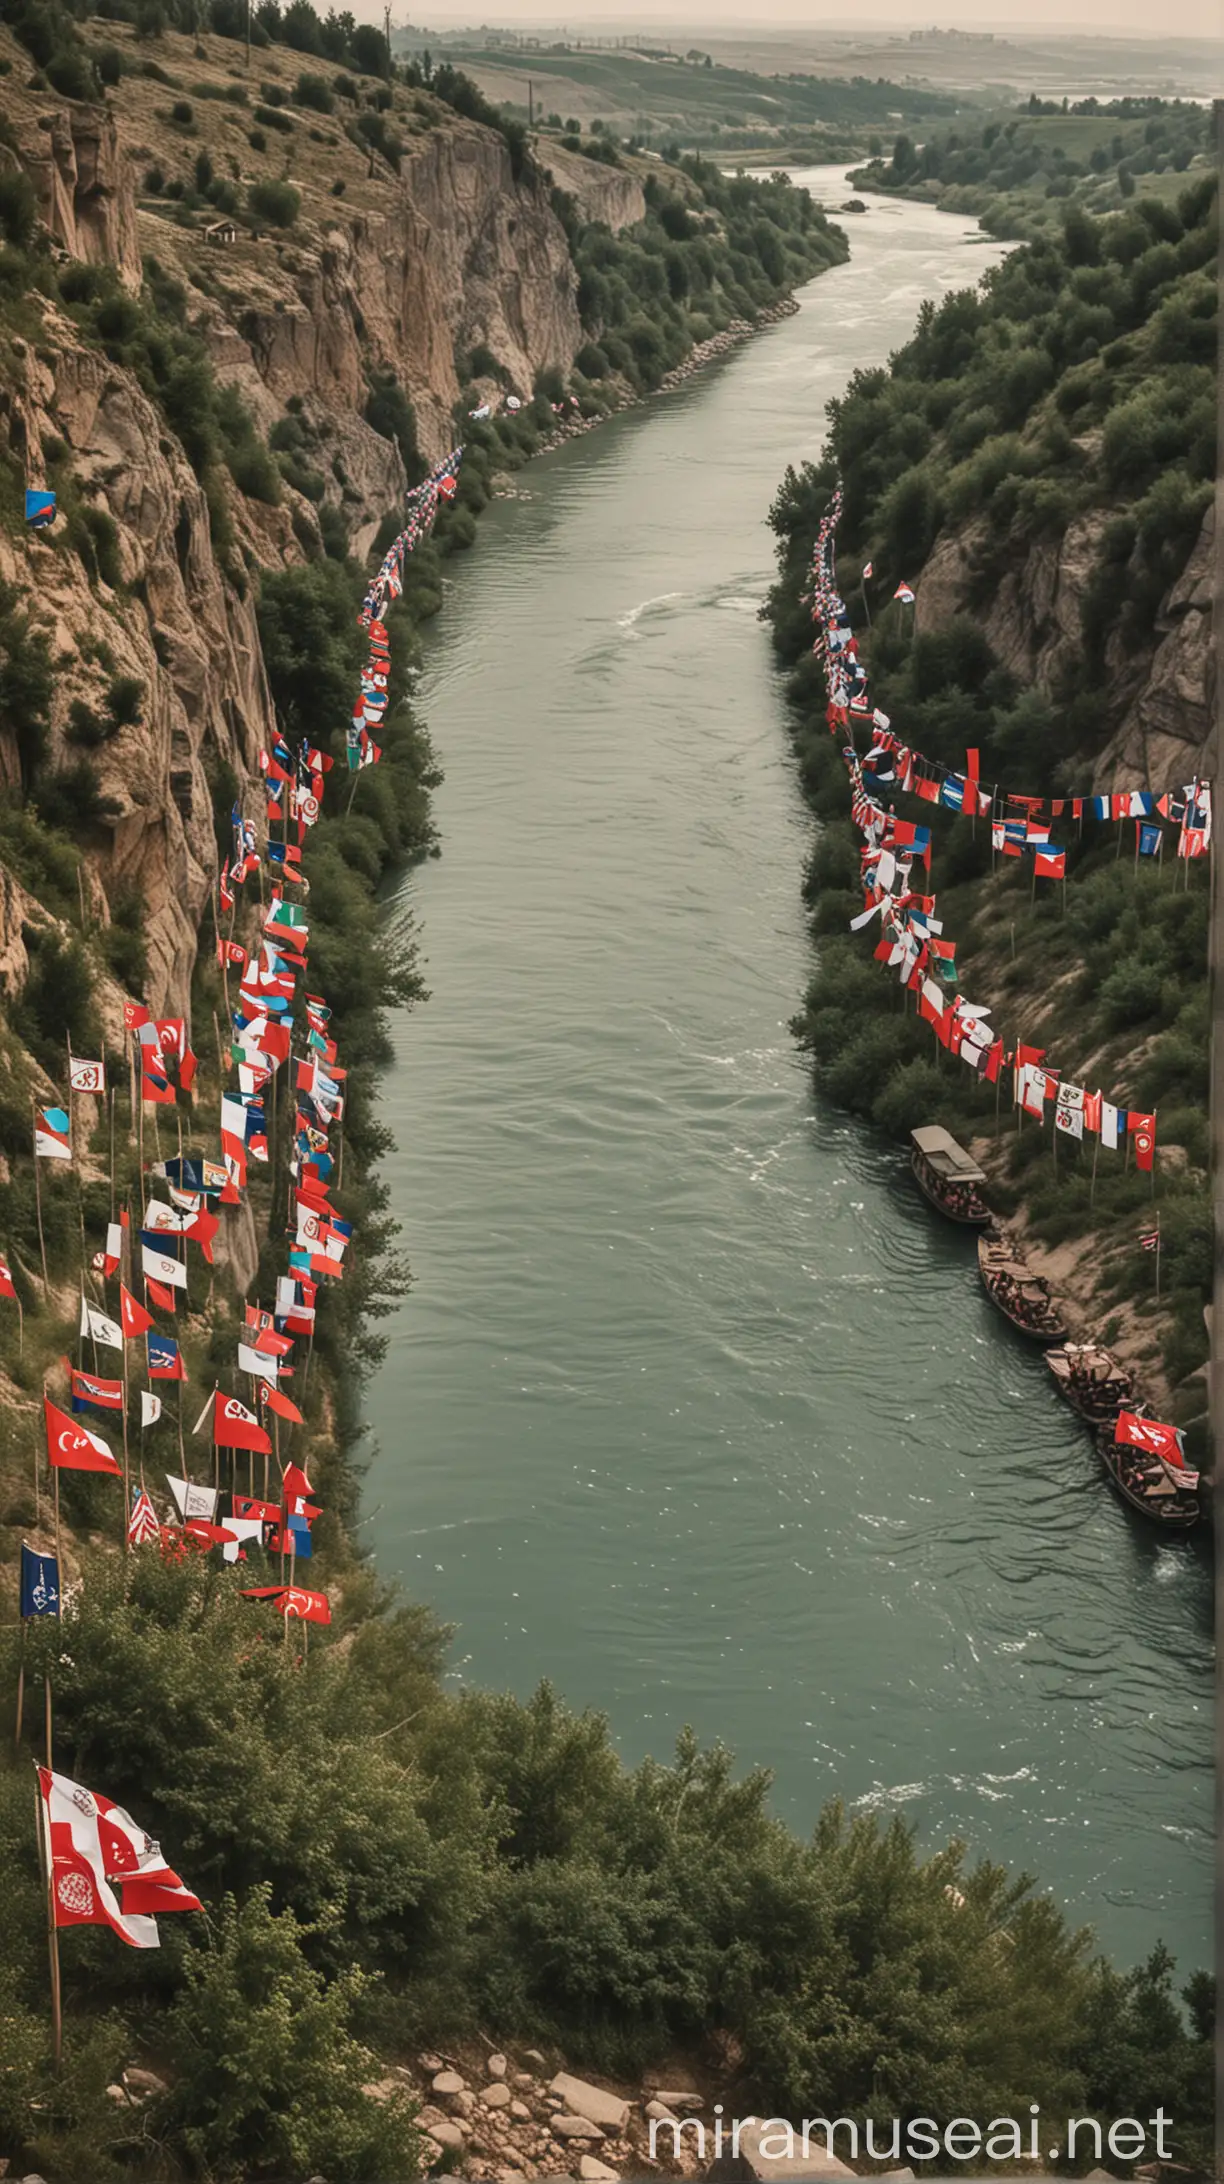 A view of the Purut River, squeezed between the flags of the Ottoman and Russian empires.
